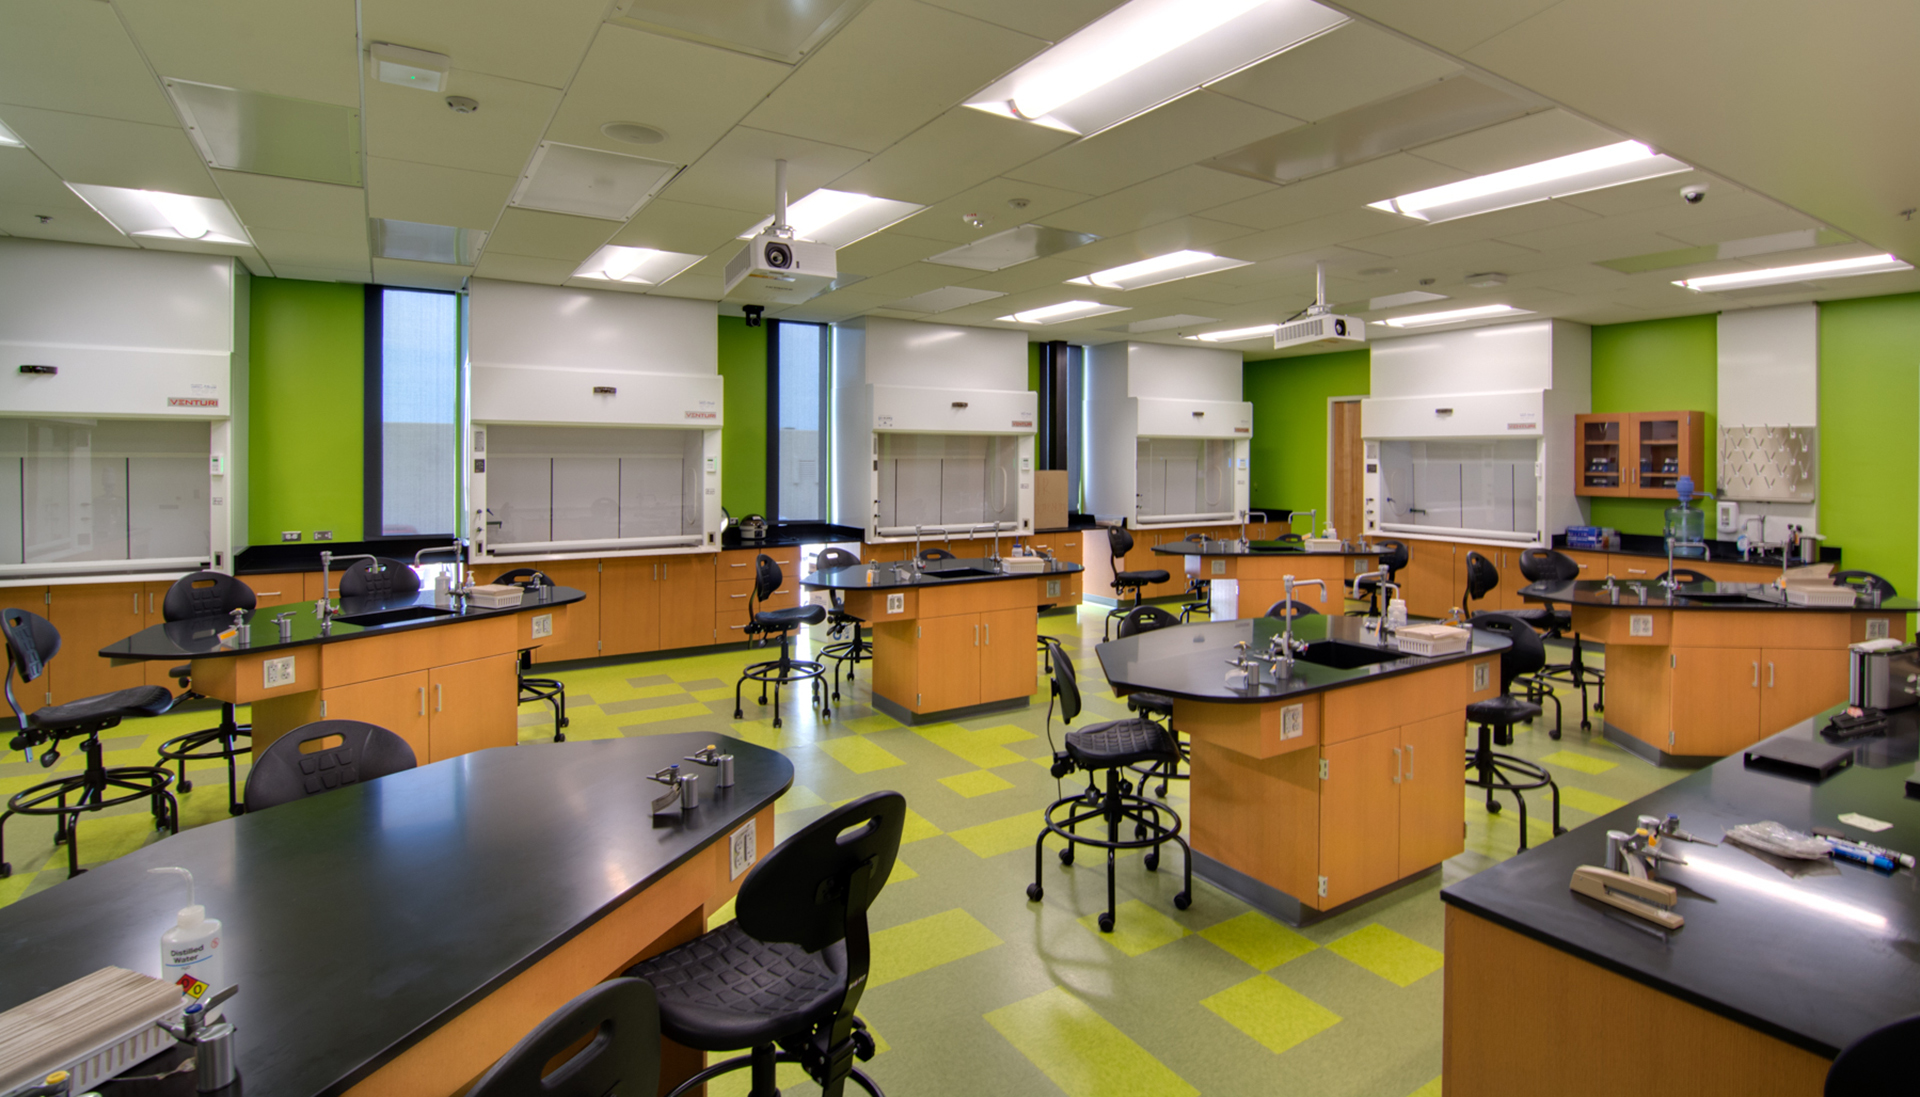 A science classroom at CAC featuring lab tables and fume hoods.